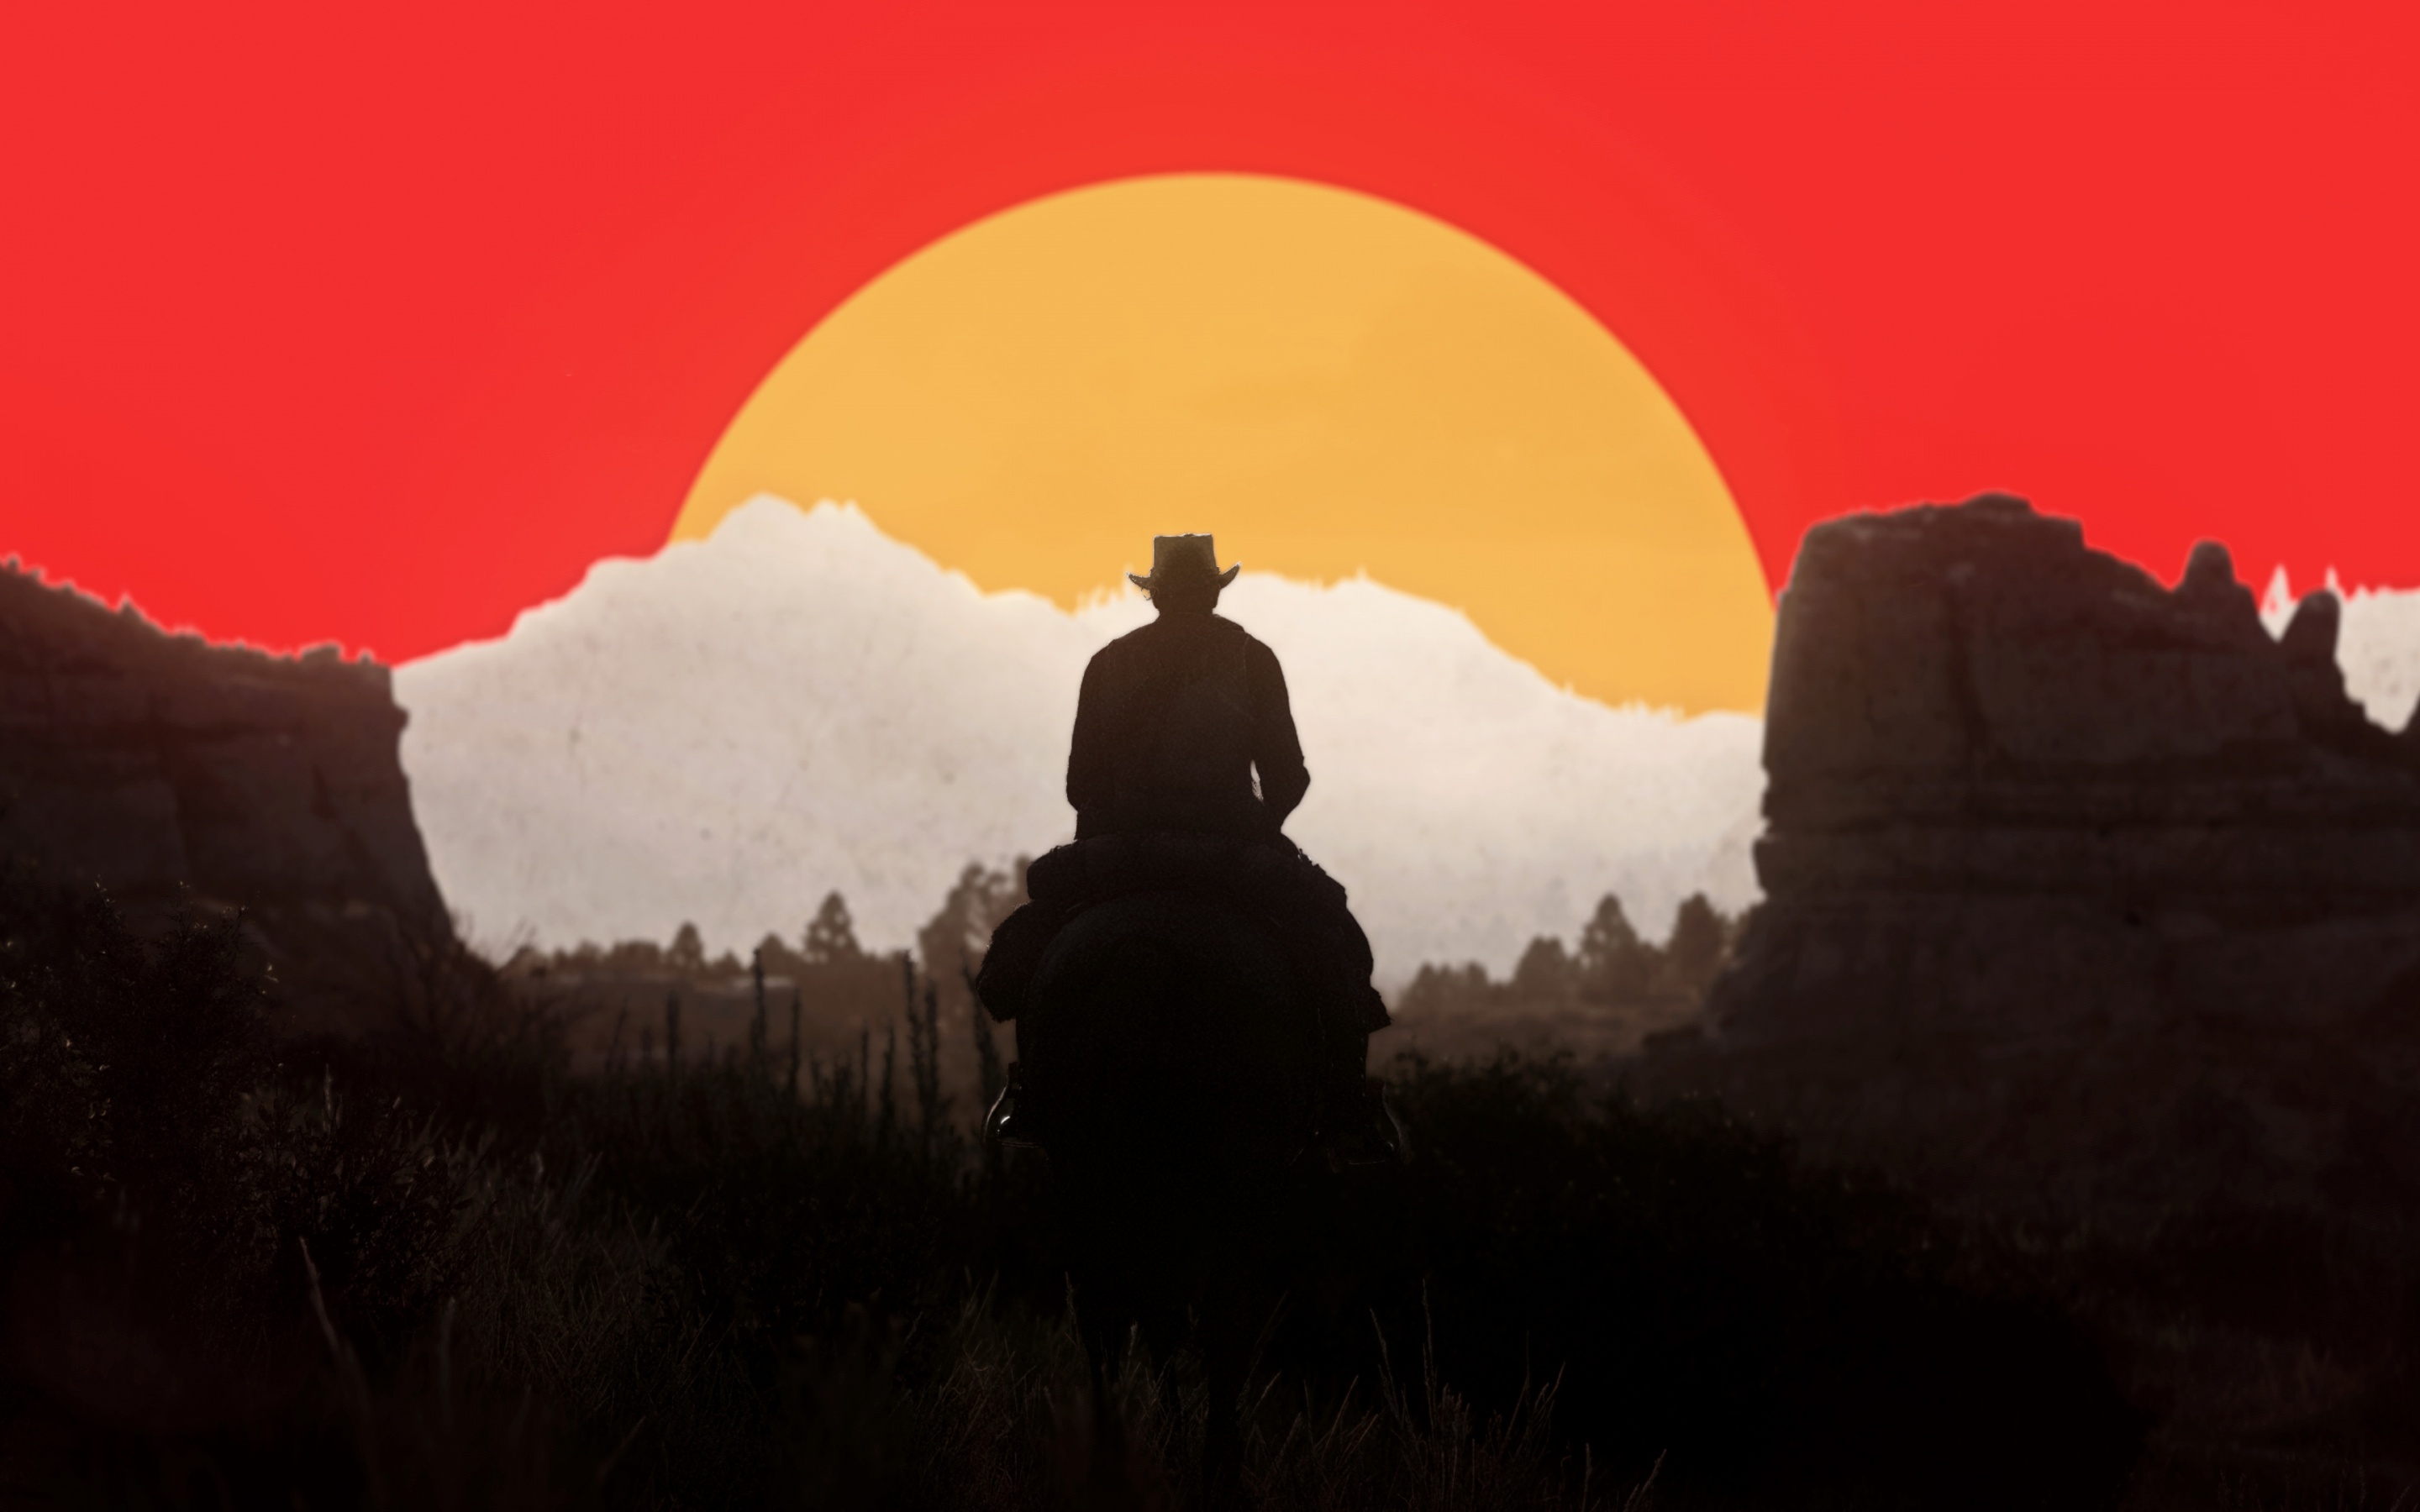 330 Red Dead Redemption 2 HD Wallpapers and Backgrounds